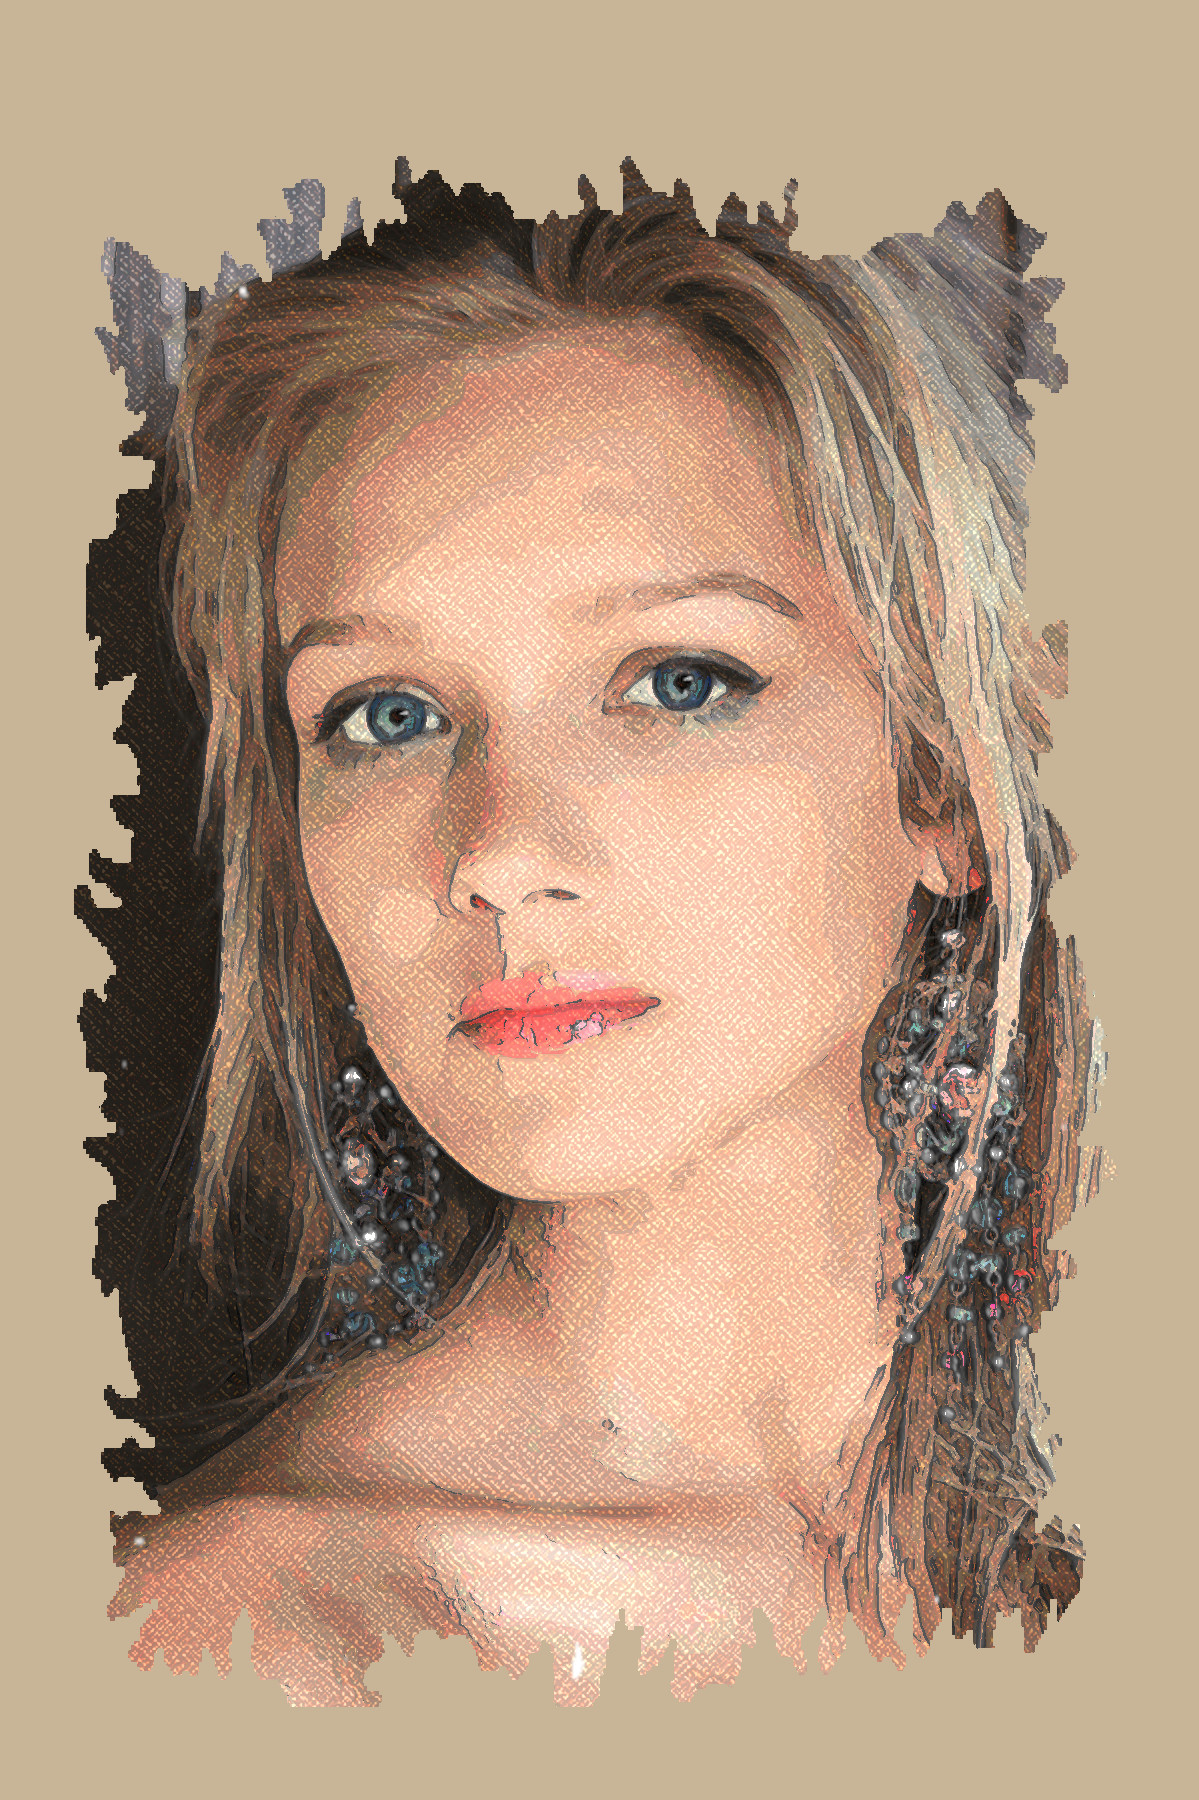 2022-01-11 14-41-20girl-2306829_1280 as a drawing with texture coloree (BC2X) (lines look regular) (lines look 2 cross) (texture colour used [165,125,94]) (nr of areas 255).jpeg